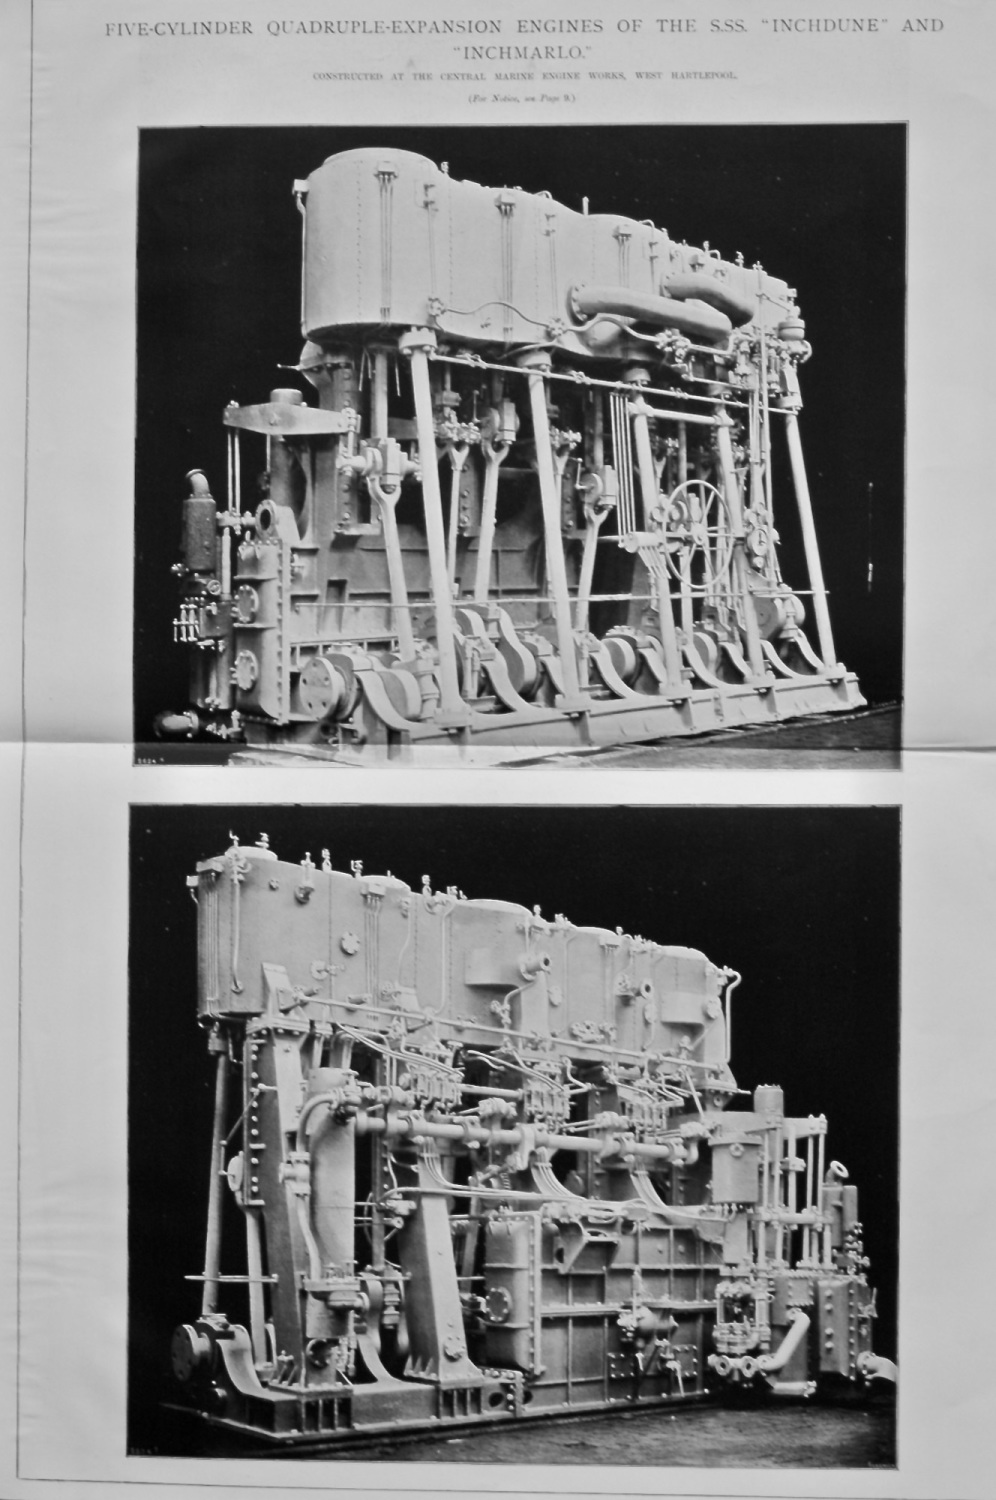 Engines of the 